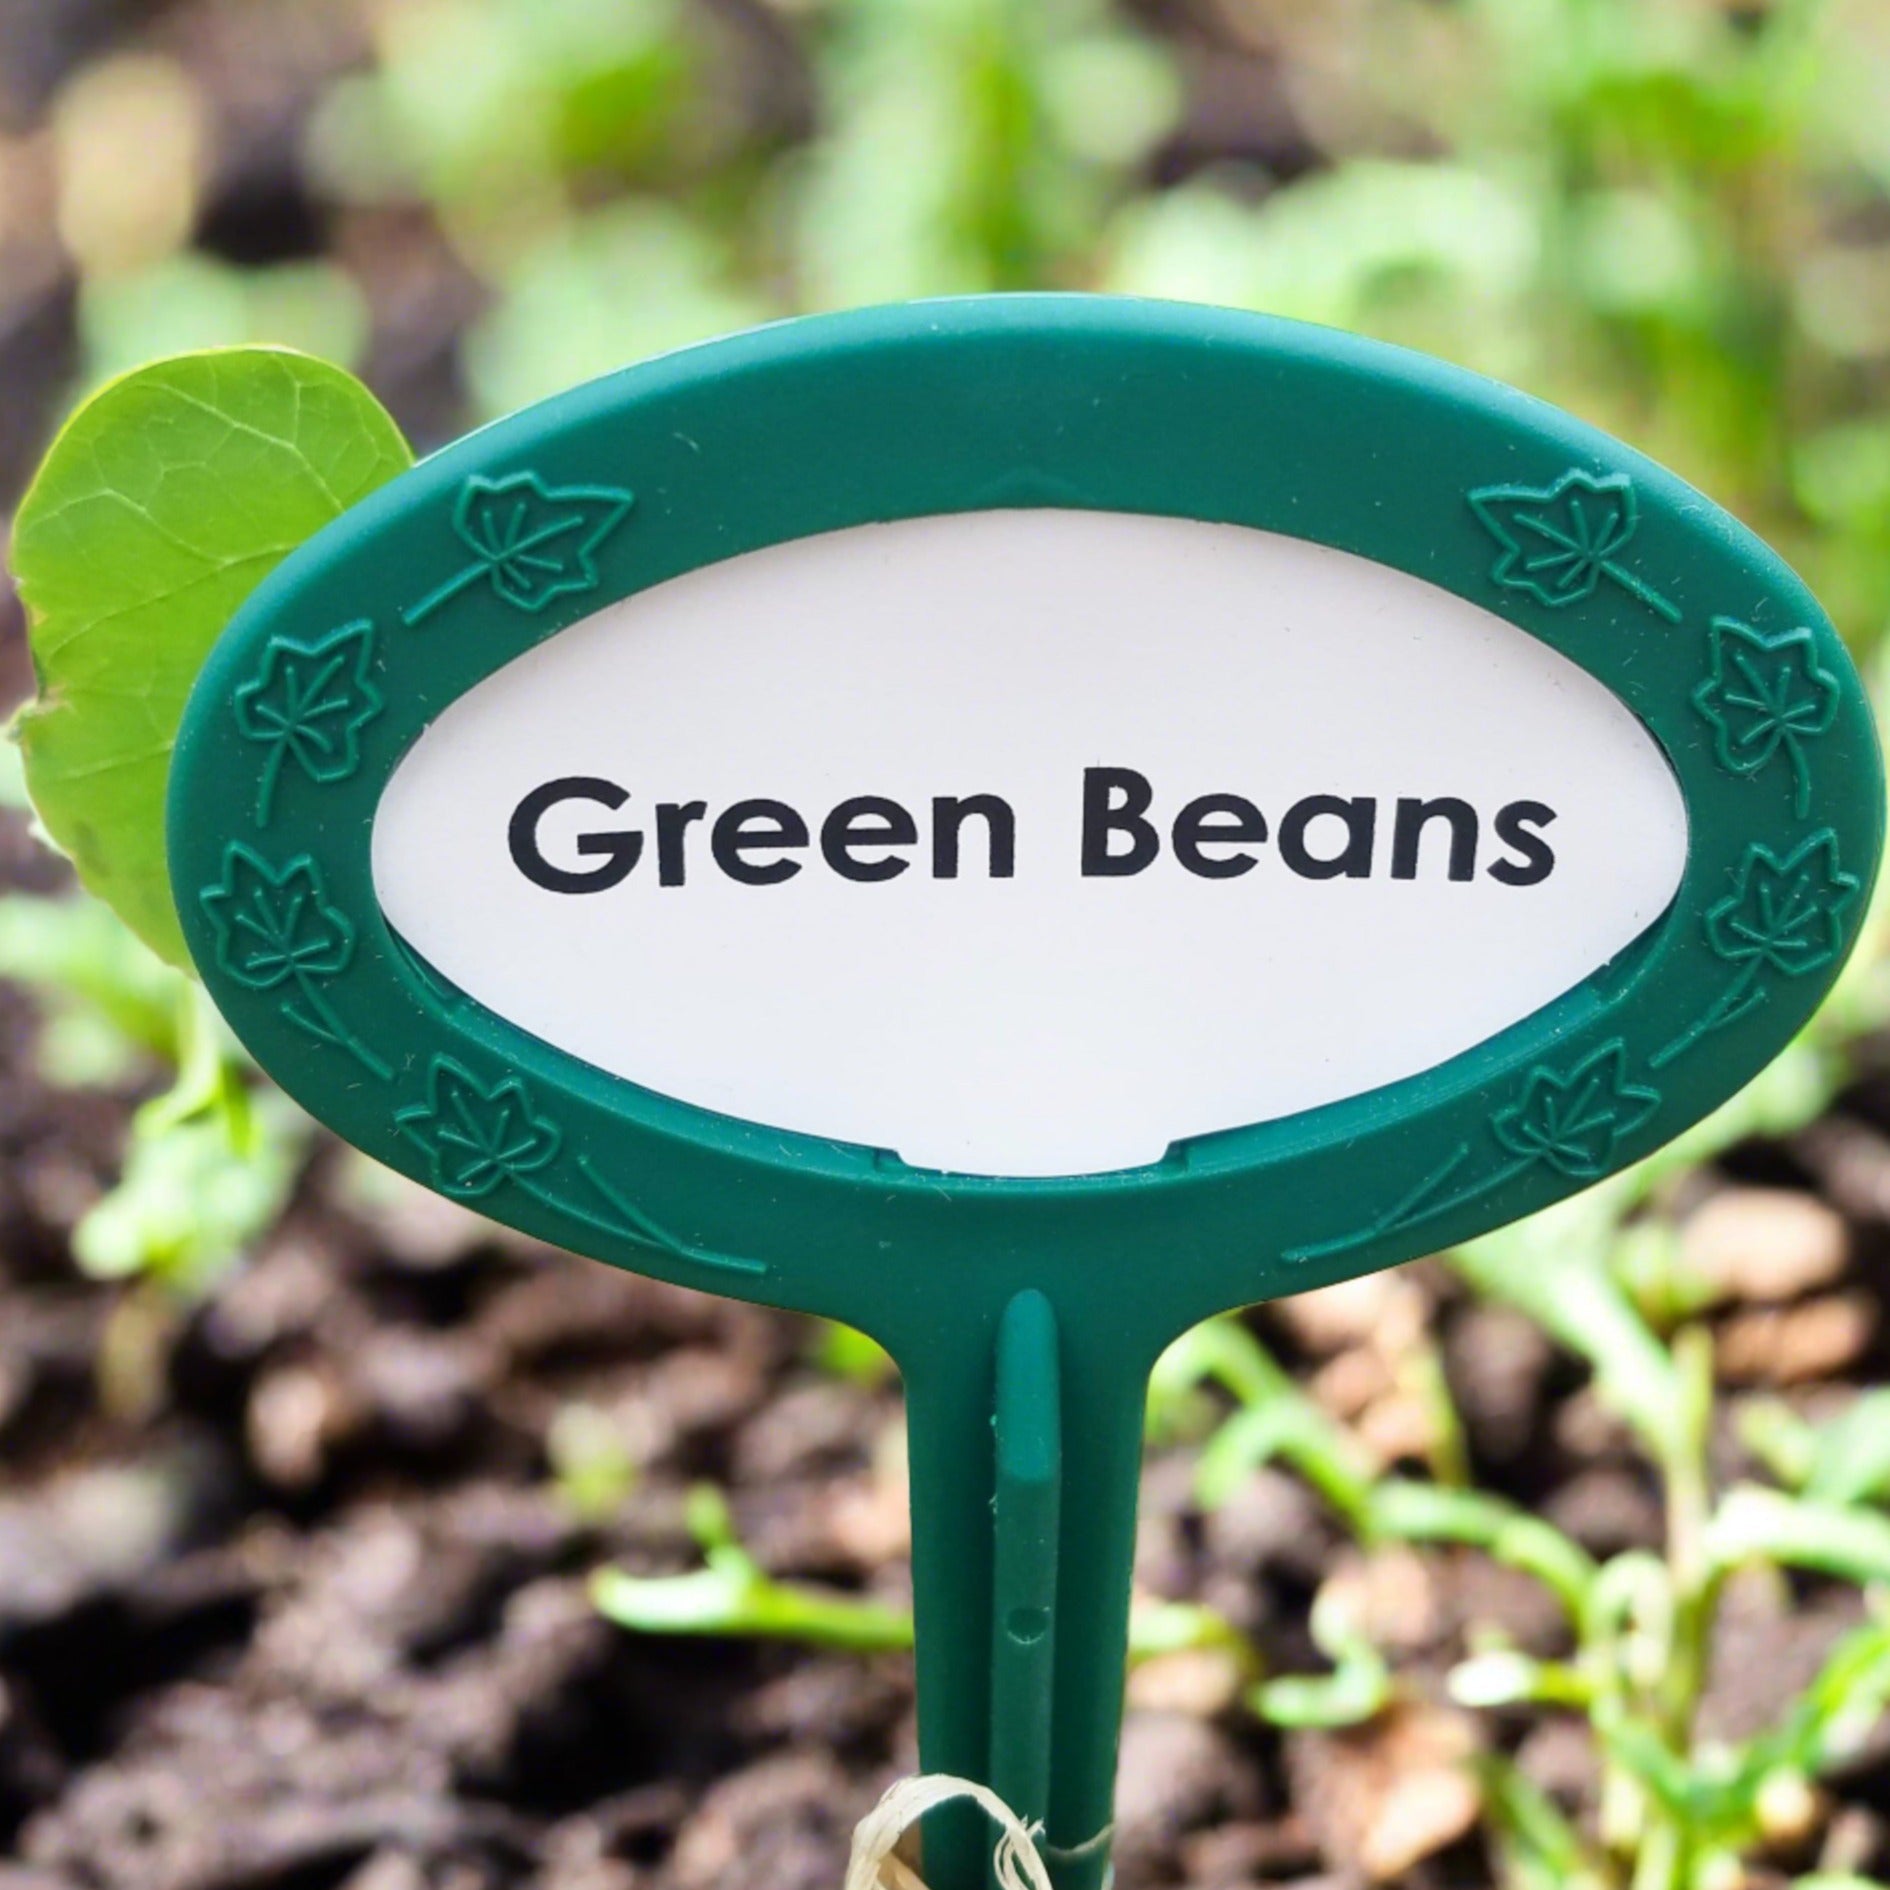 Preprinted garden marker Veggie collection 20 pack. long lasting Made in USA. Green Beans